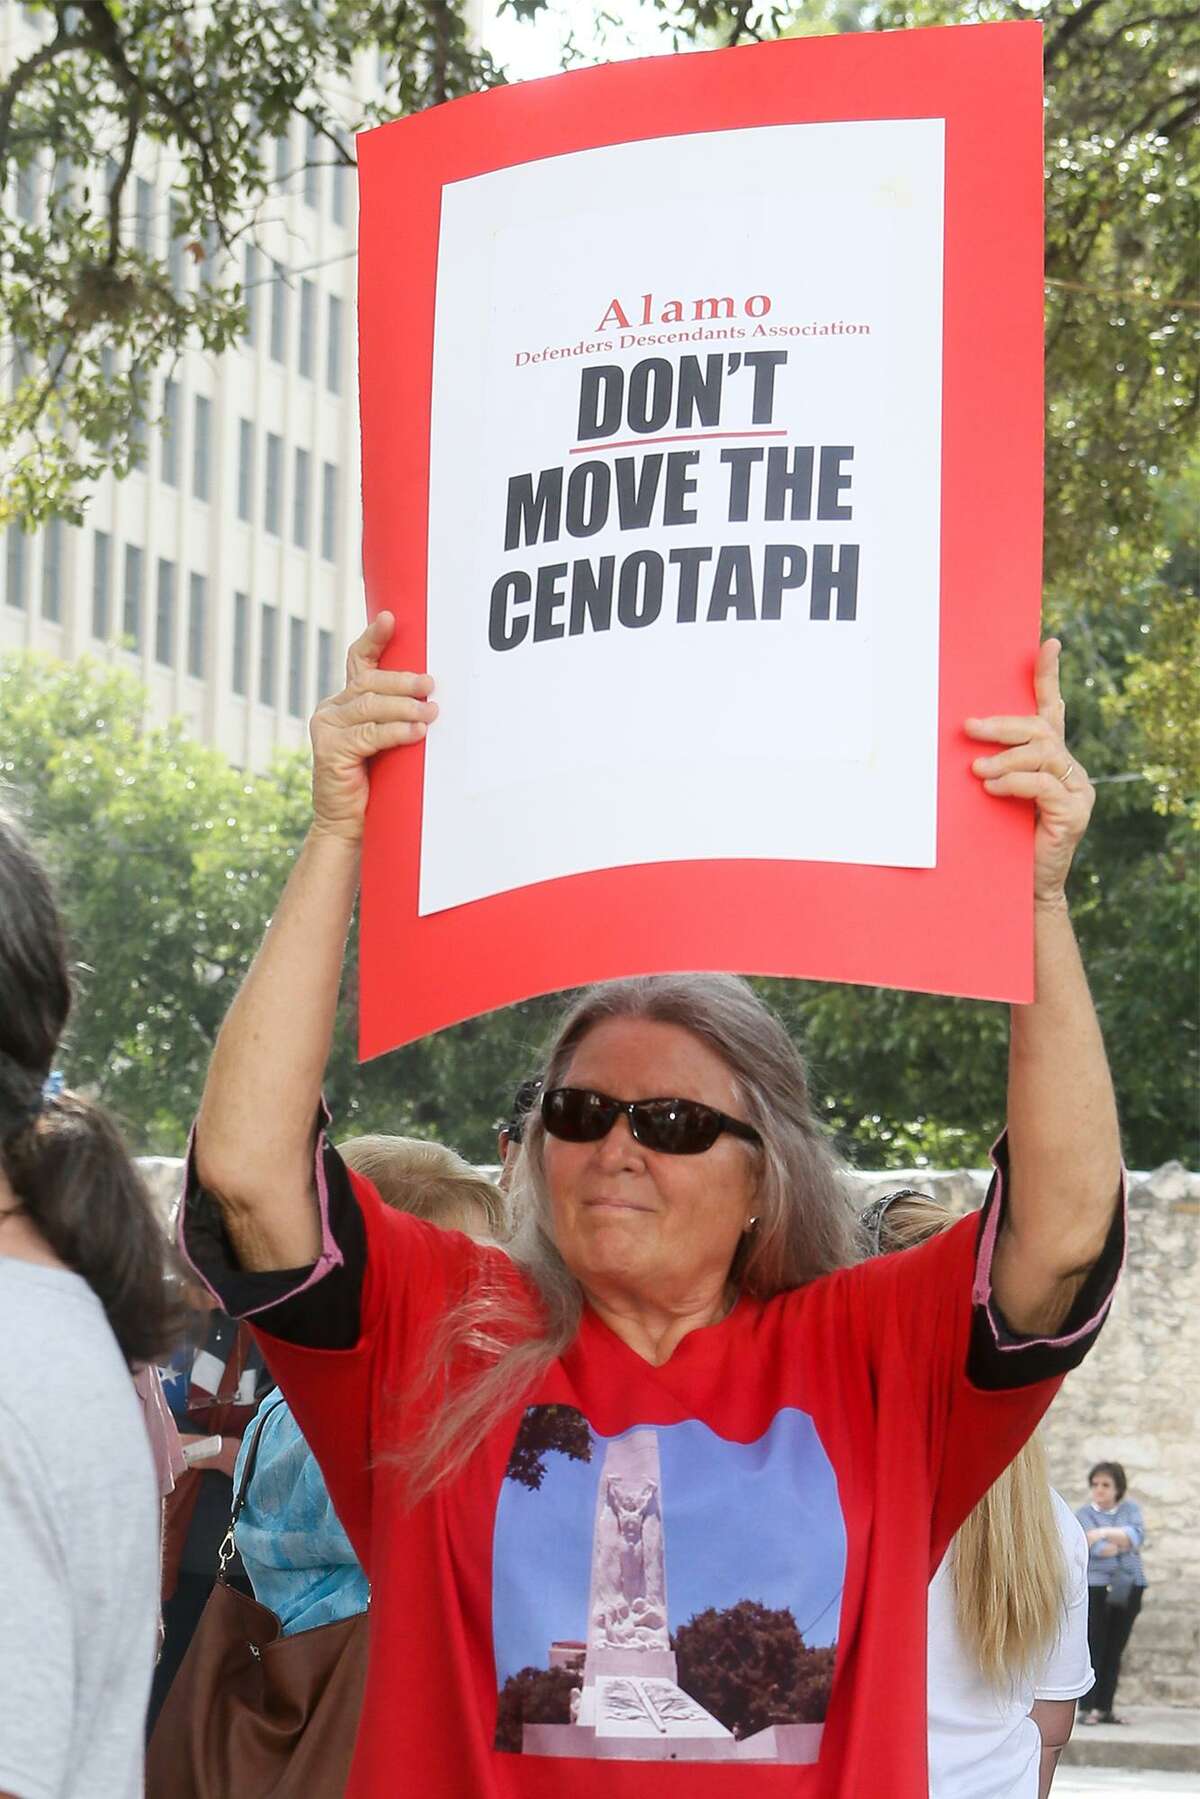 Sheila Kimple from Hayes County holds a sign reading "Don't Move the Cenotaph" during a rally opposing relocation of the Cenotaph in Alamo Plaza hosted by the Alamo Defenders Descendants Association on Saturday, July 28, 2018.